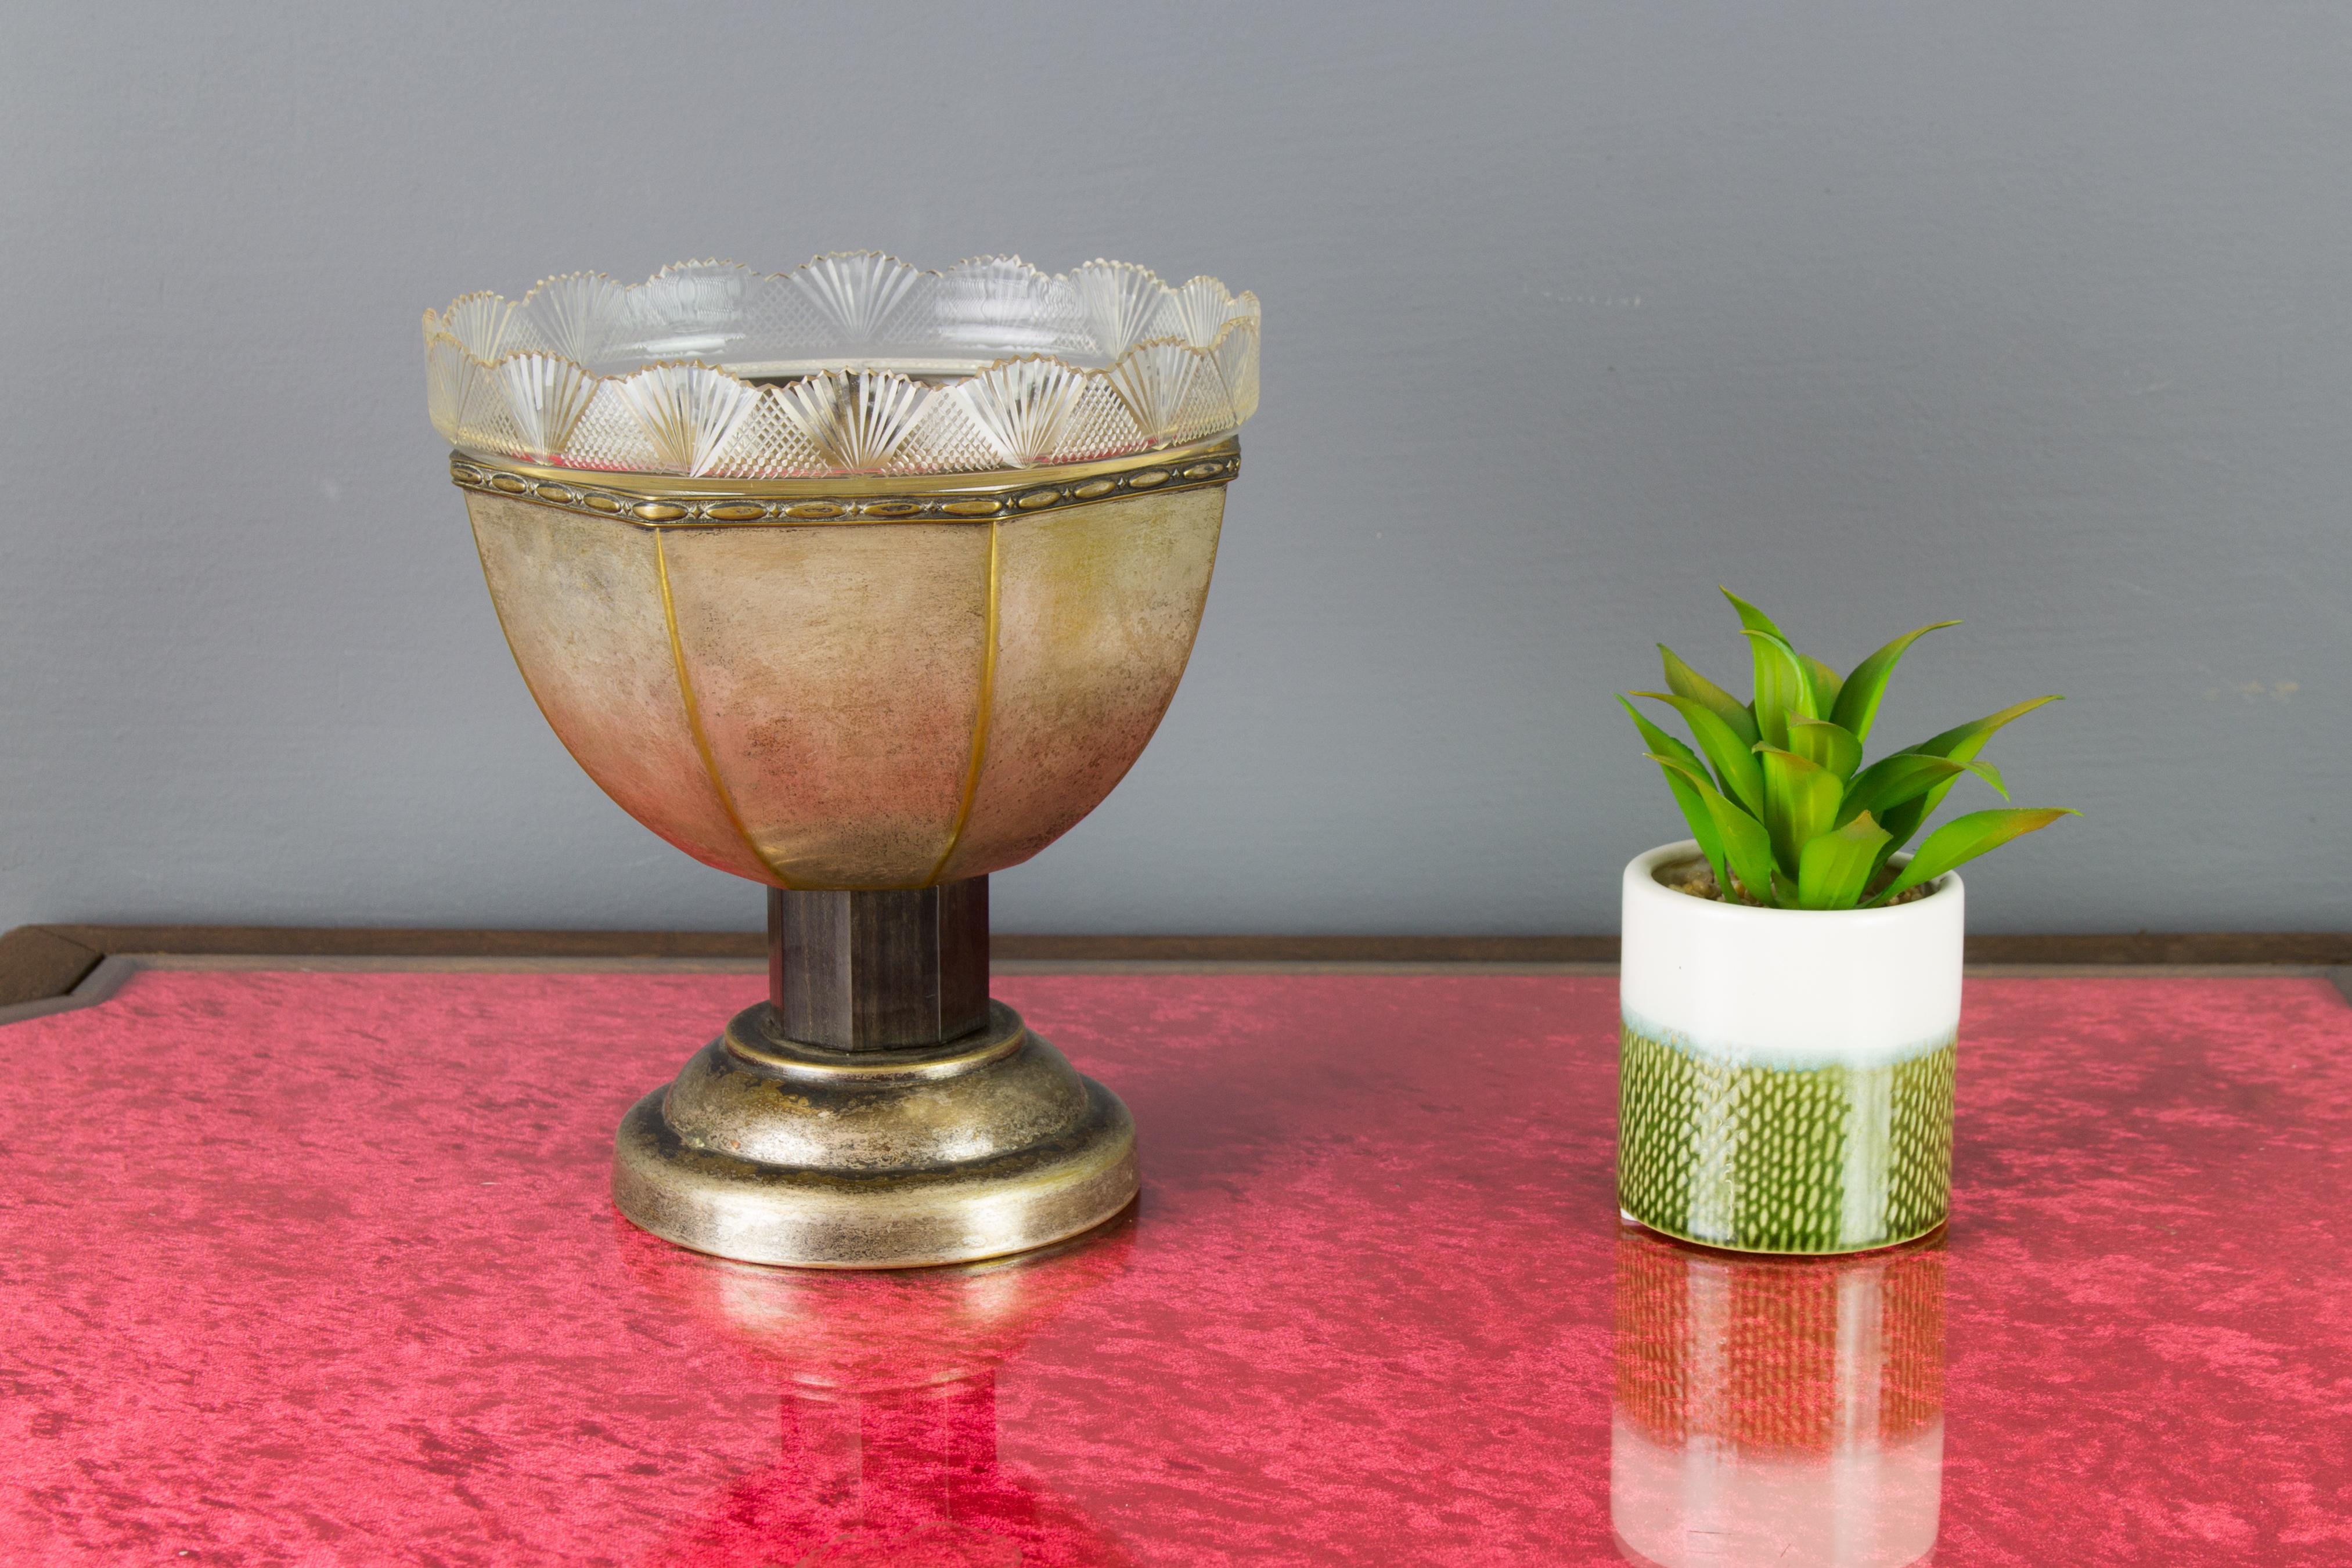 Early 20th Century French Art Nouveau Brass Centerpiece with Cut-Glass Bowl, 1920s